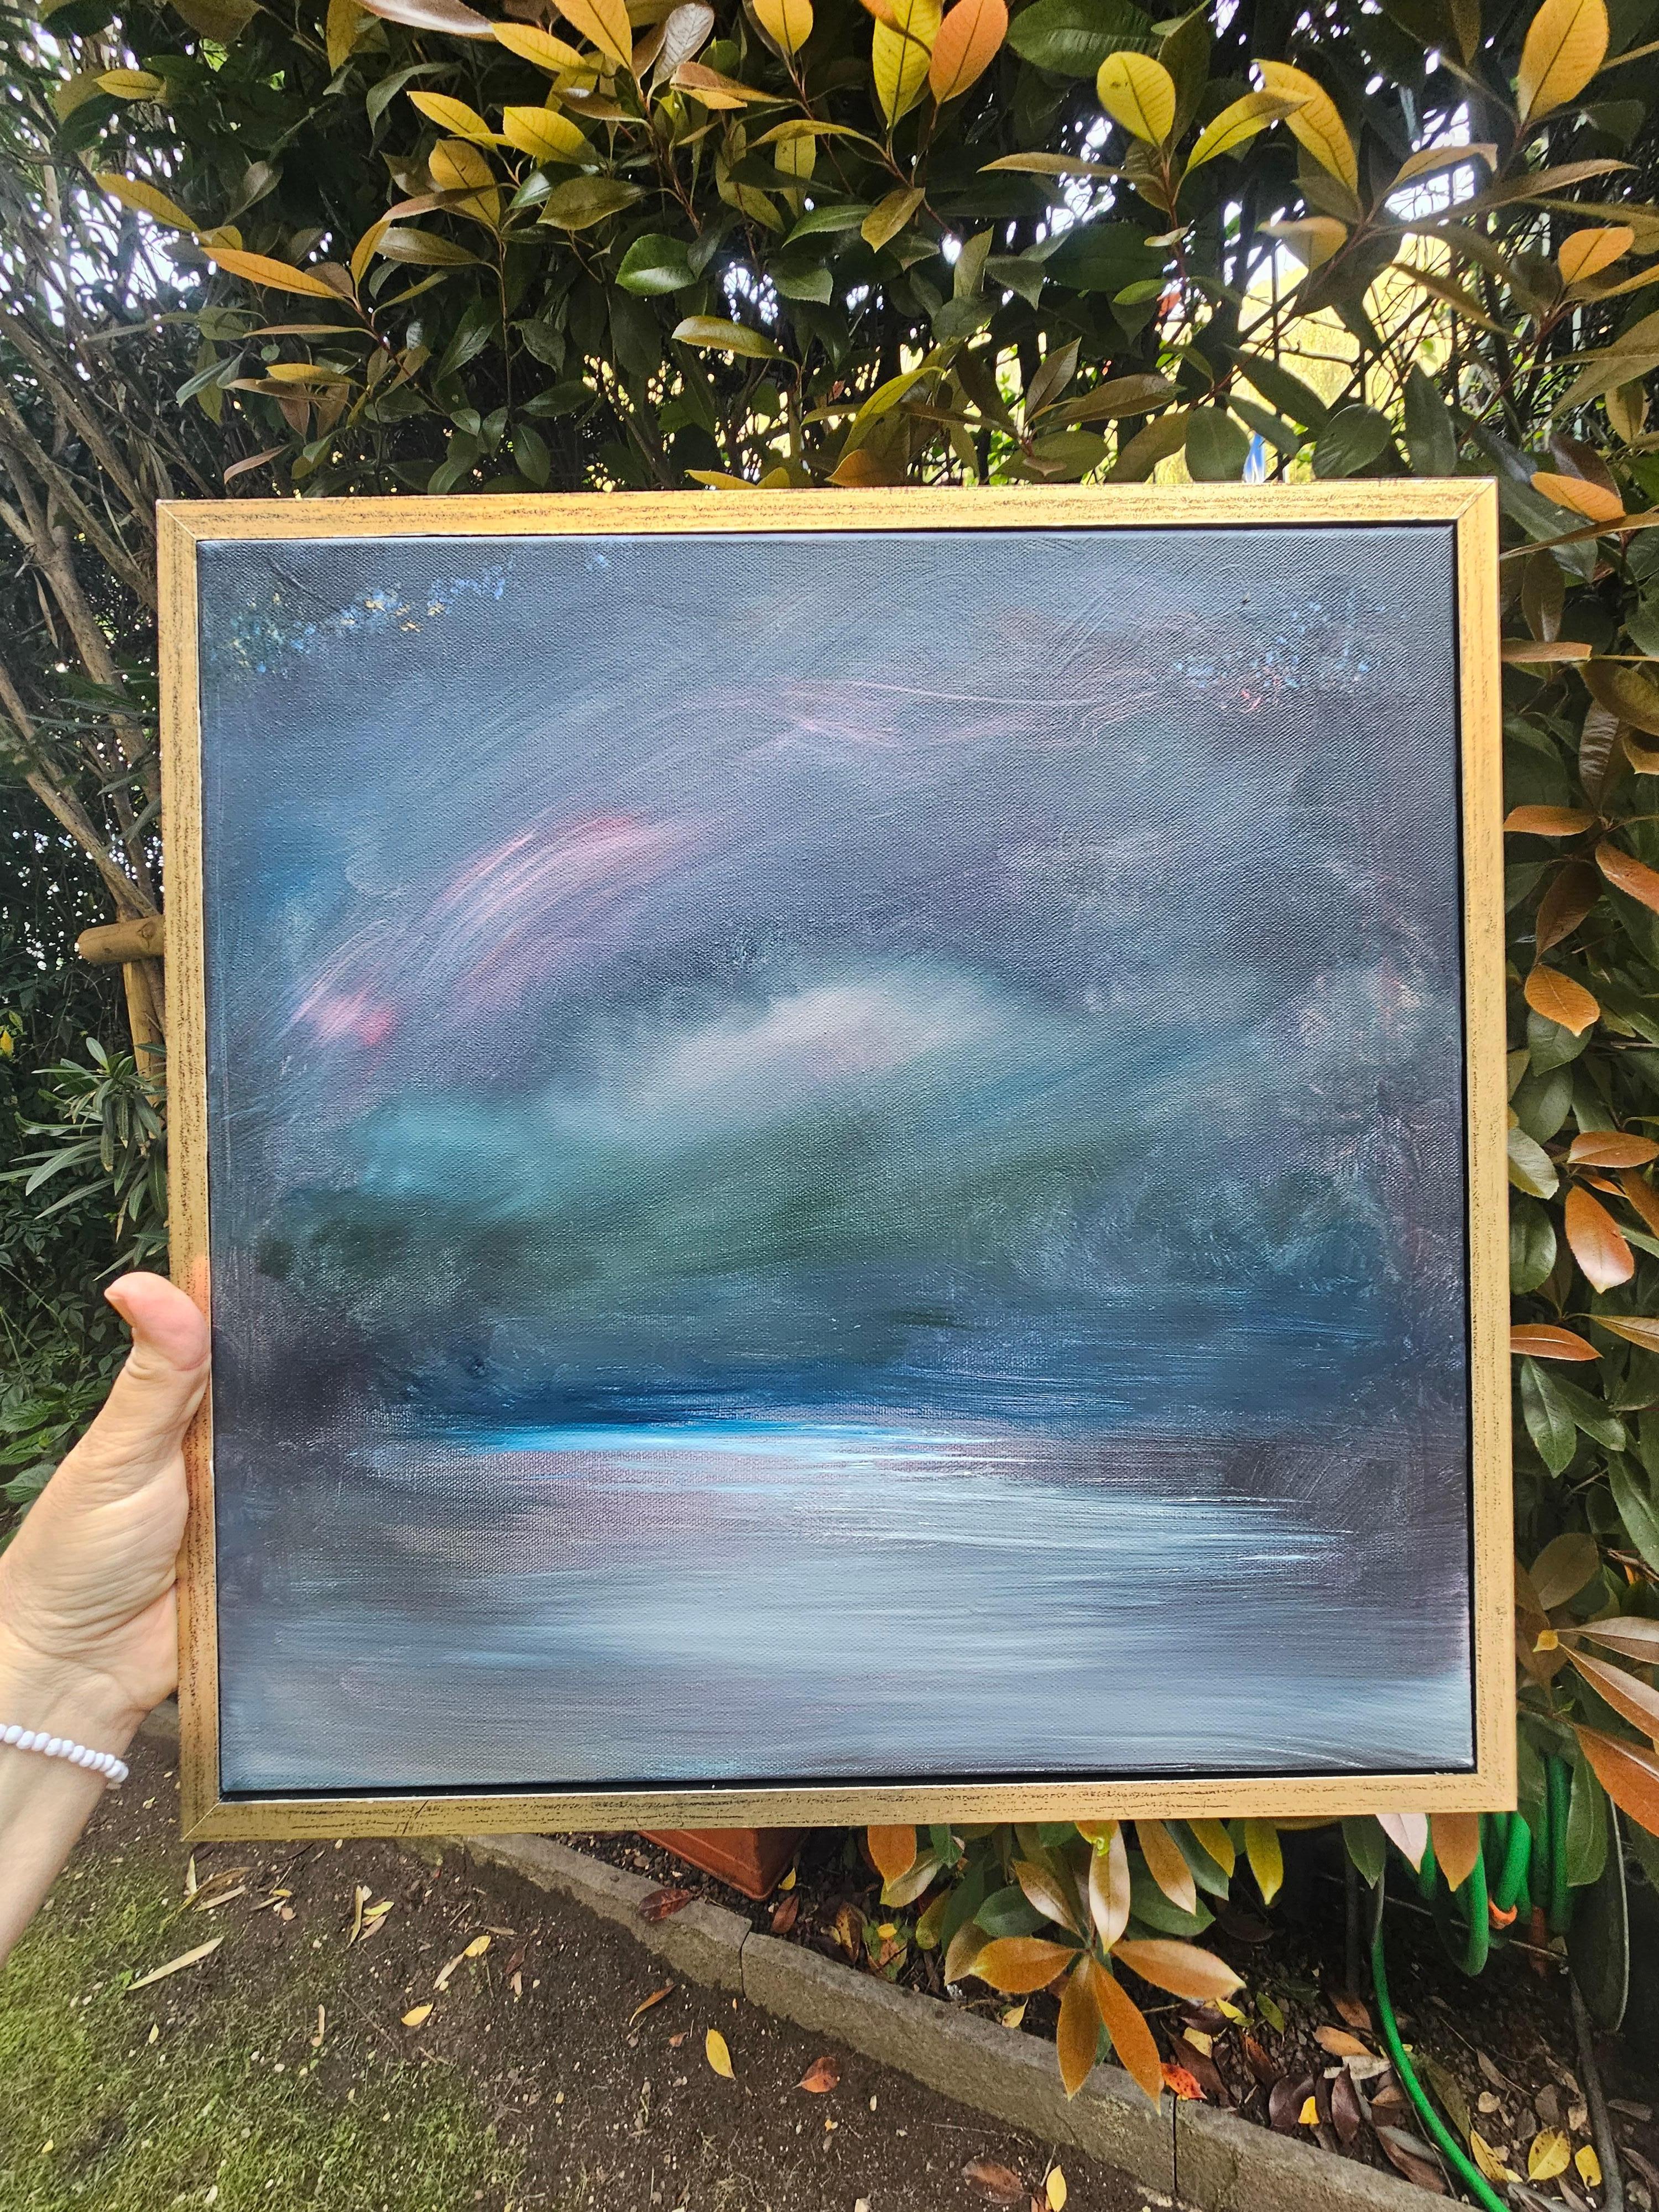 The long walk home - Framed abstract night sky seascape painting - Painting by Jennifer L. Baker